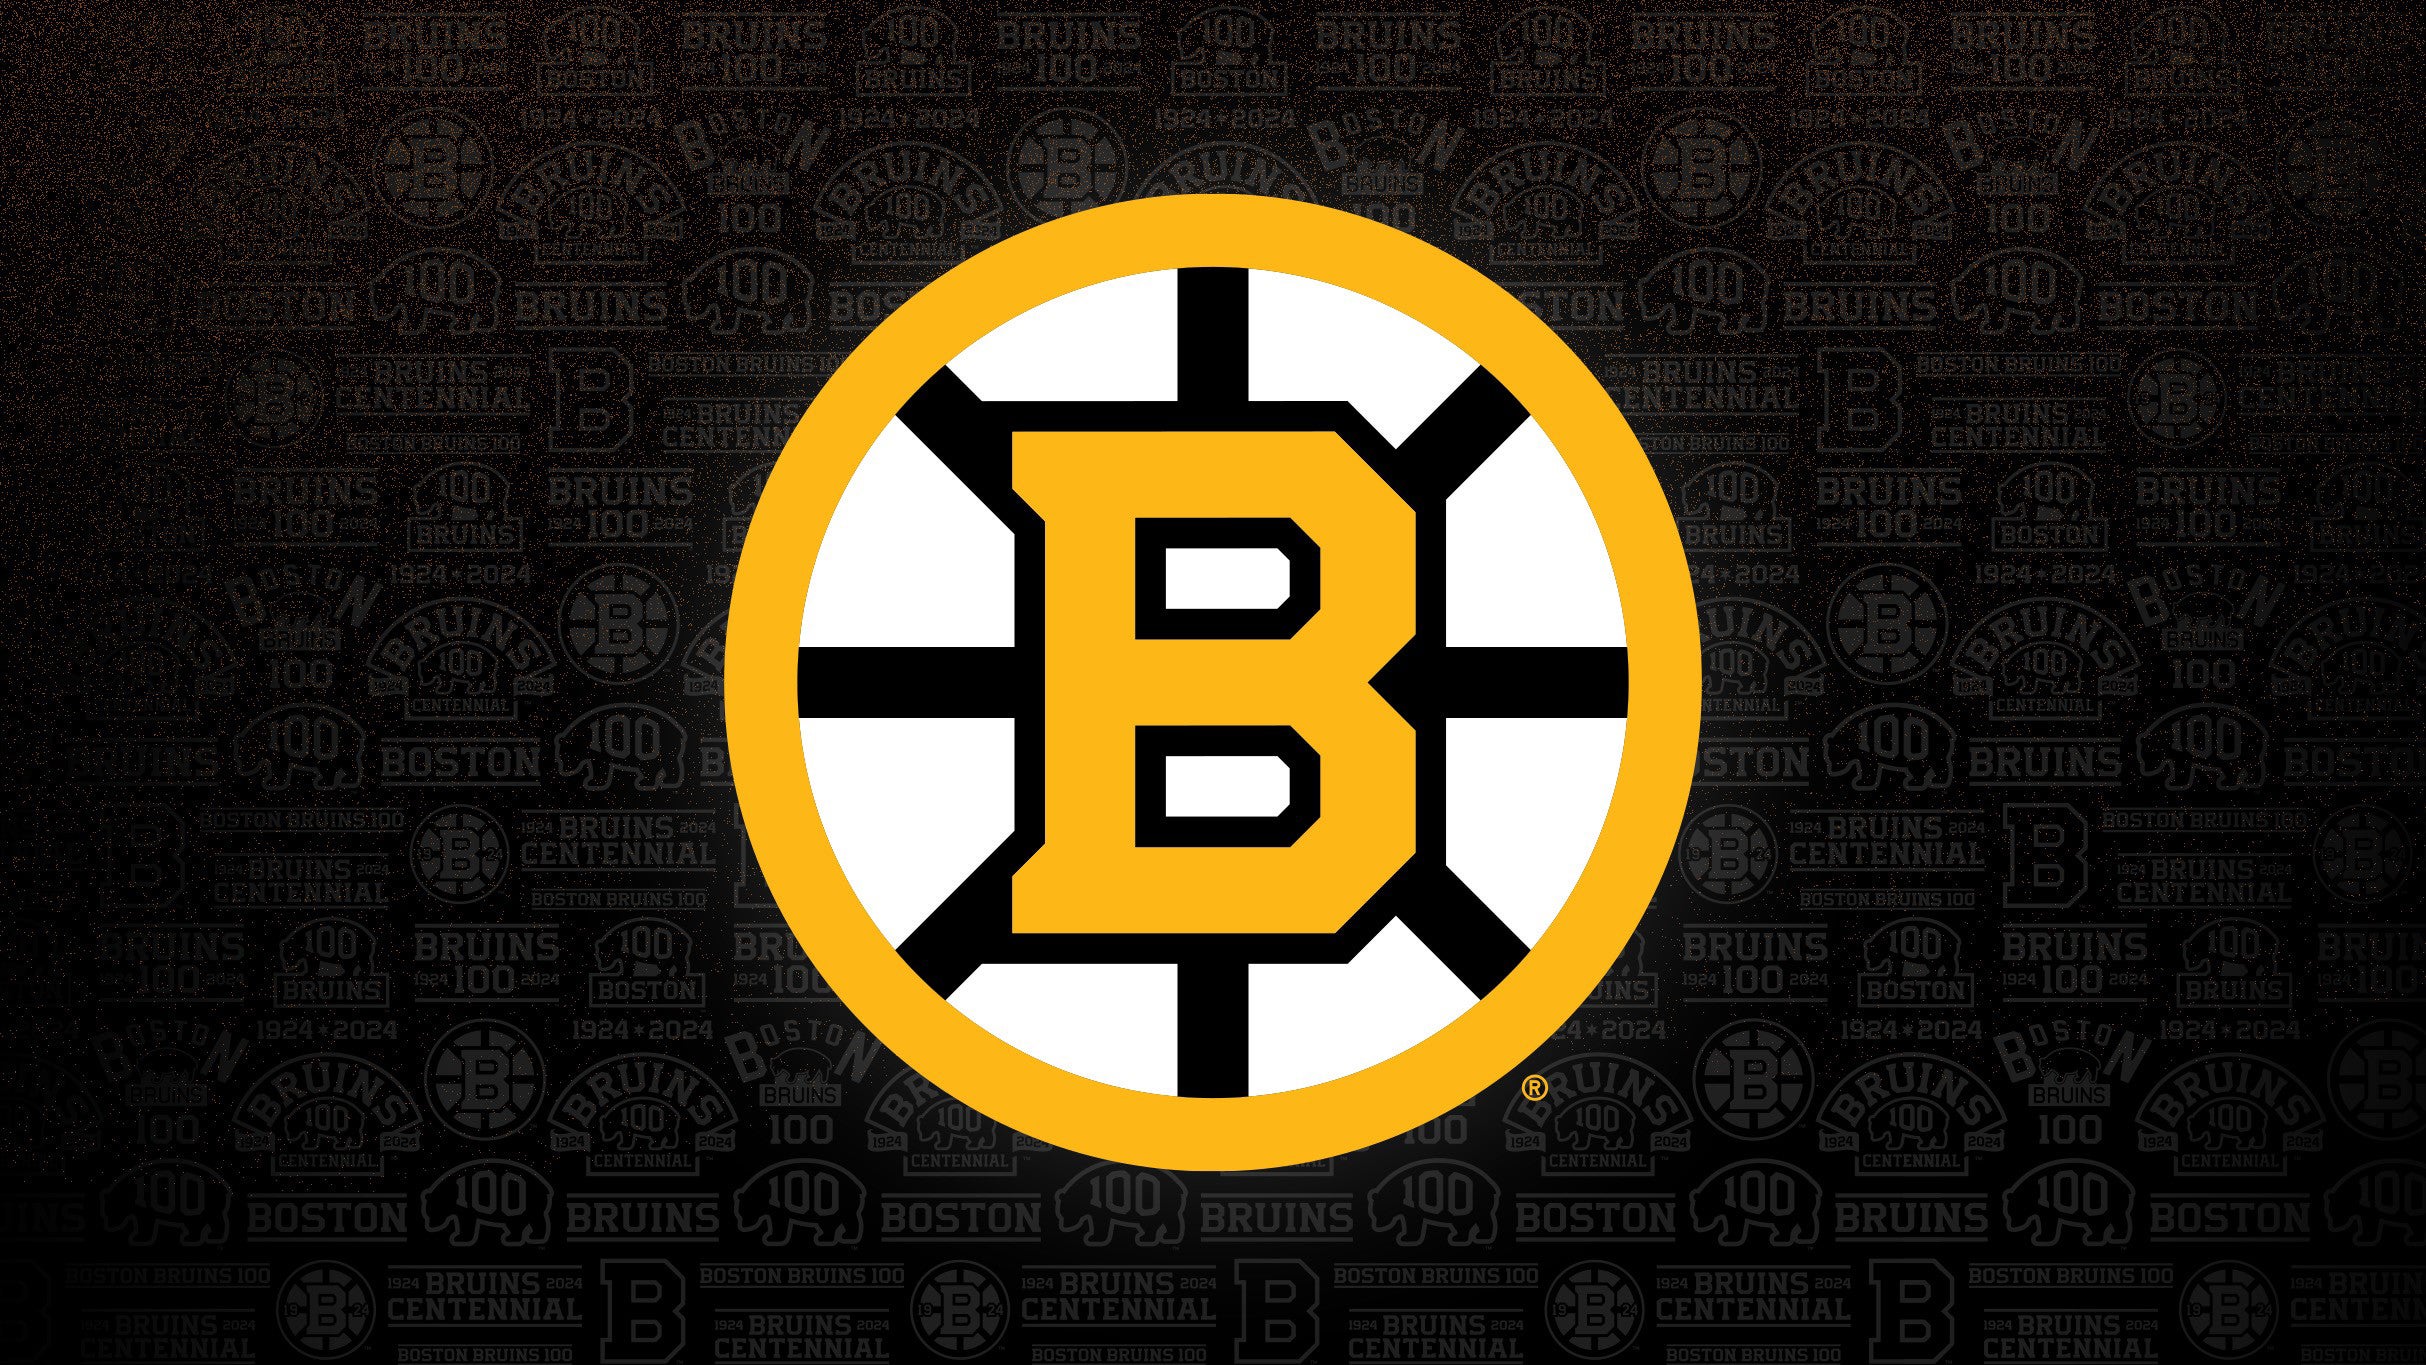 First Round Gm 2: Maple Leafs at Bruins Rd 1 Hm Gm 2